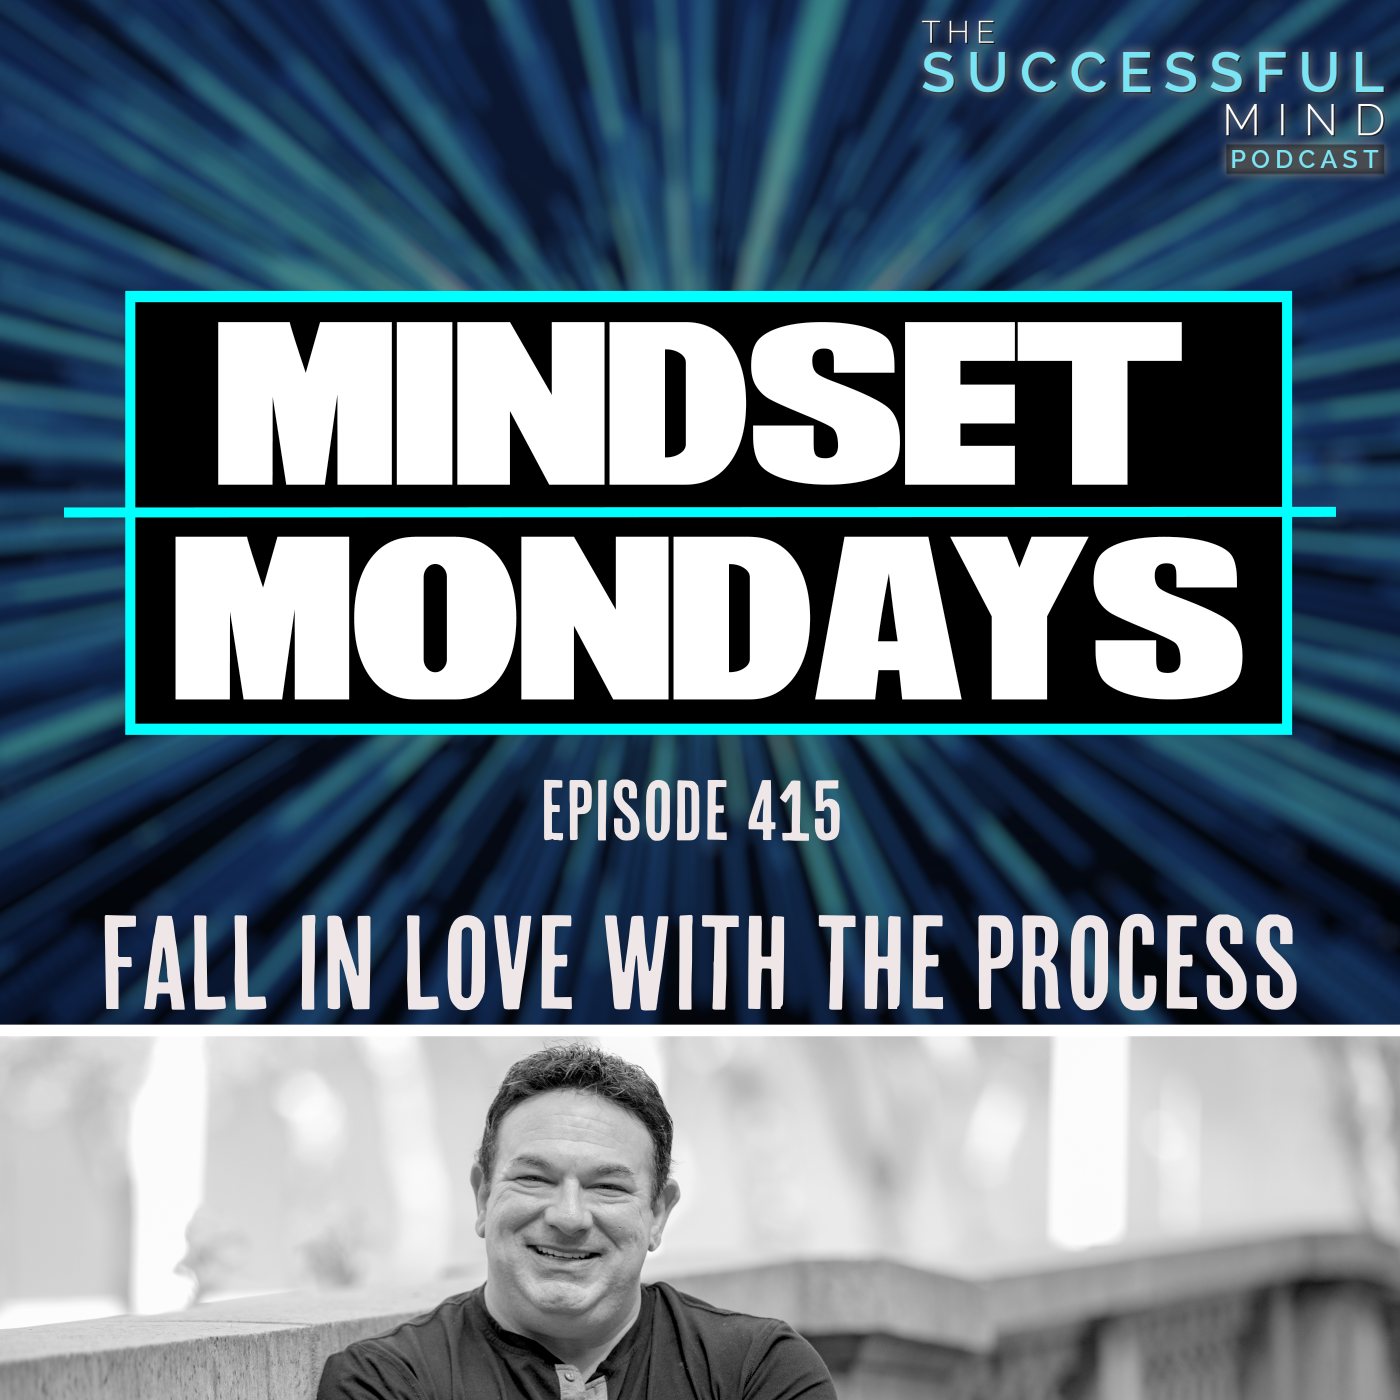 The Successful Mind Podcast - Episode 415 - Mindset Mondays - Fall In Love With The Process